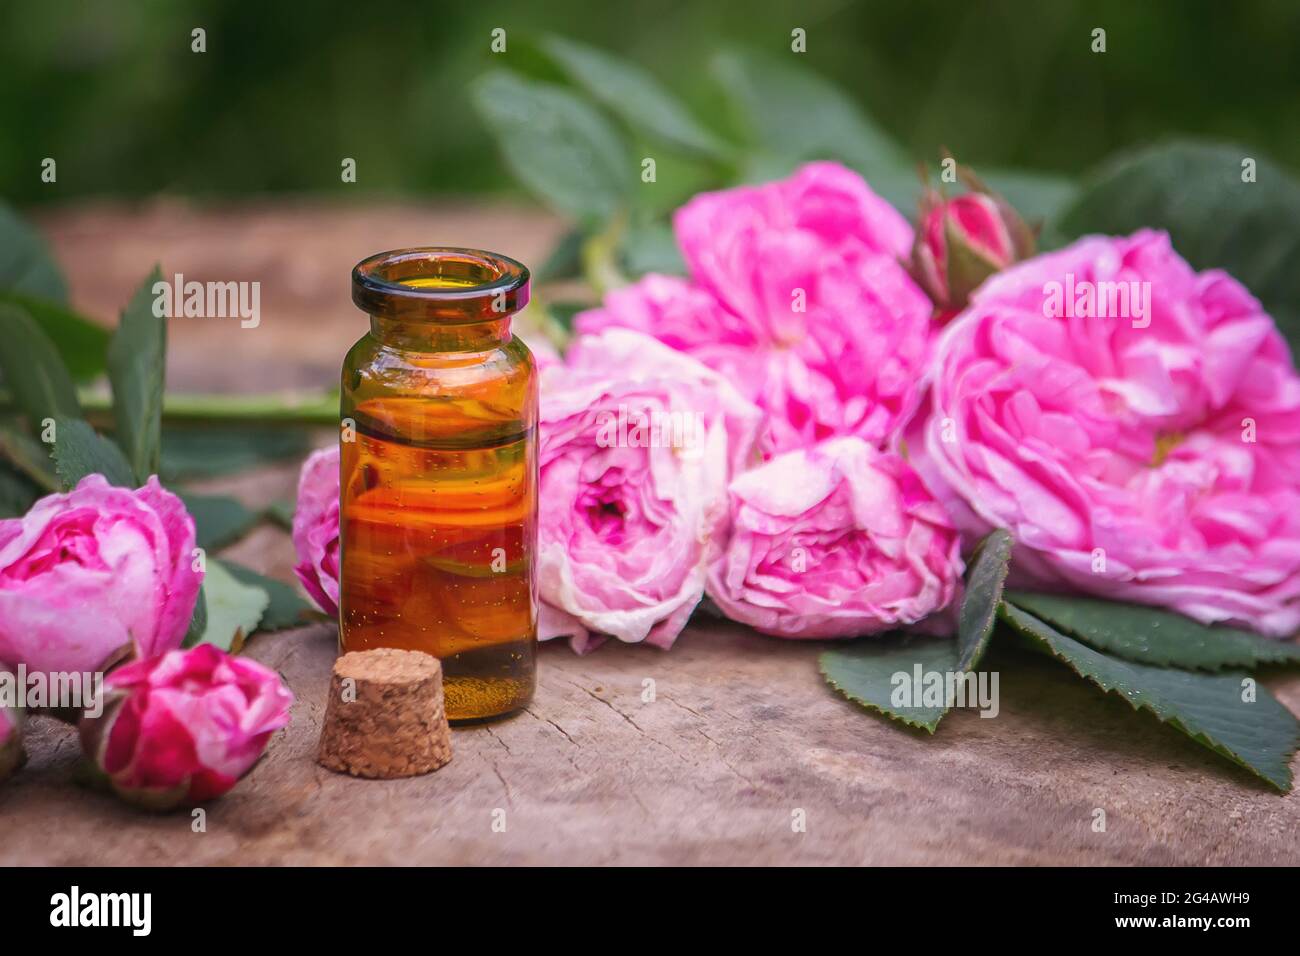 Close-up of rose essential oil bottle with falling leaves on wooden background. Stock Photo